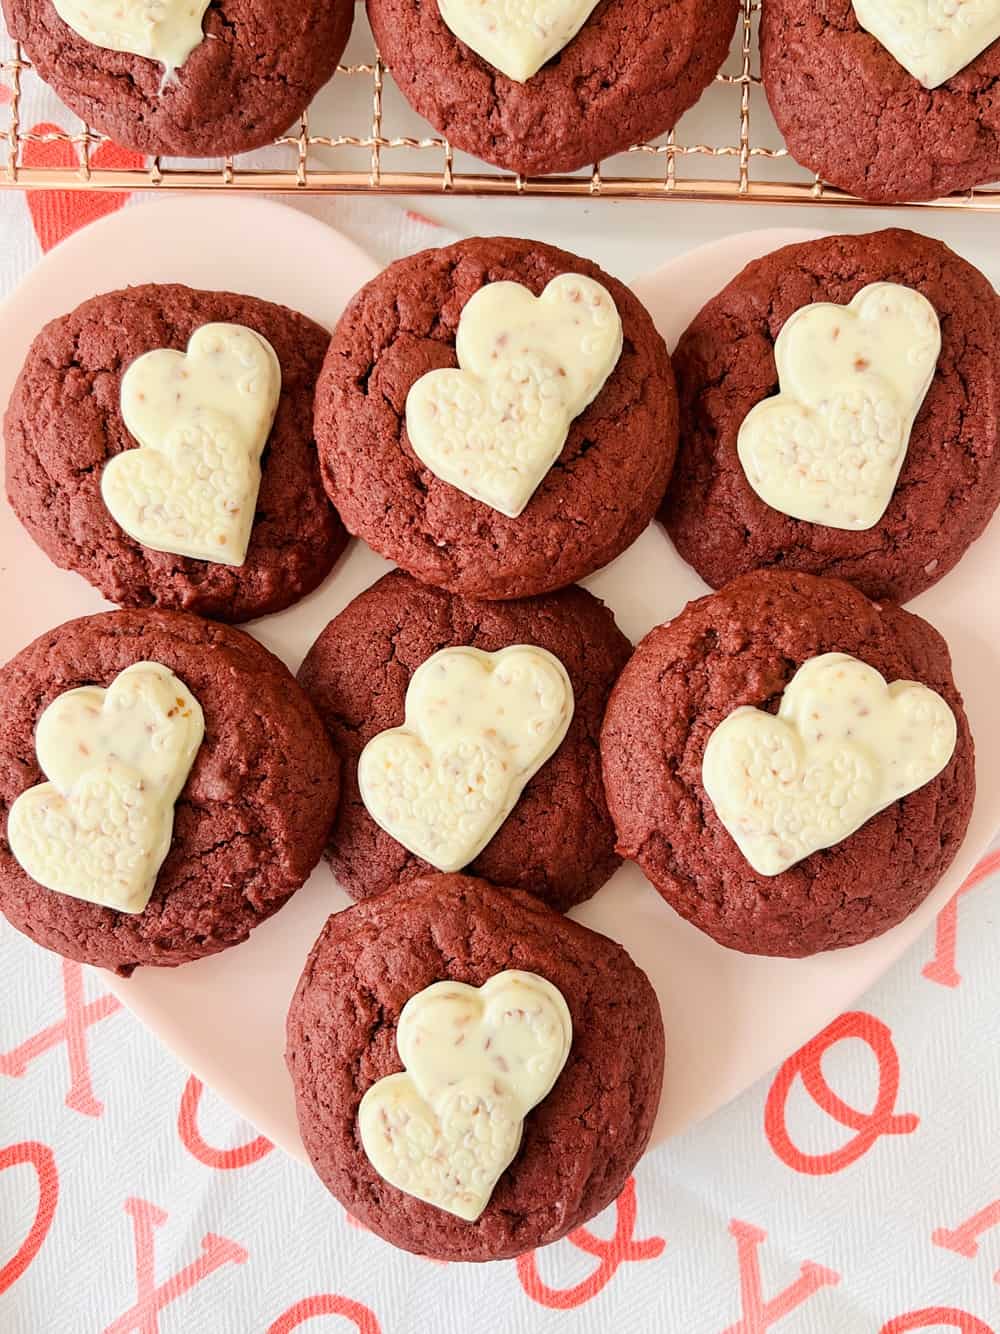 Celebrate Love with Red Velvet Heart Cookies this Valentine’s Day